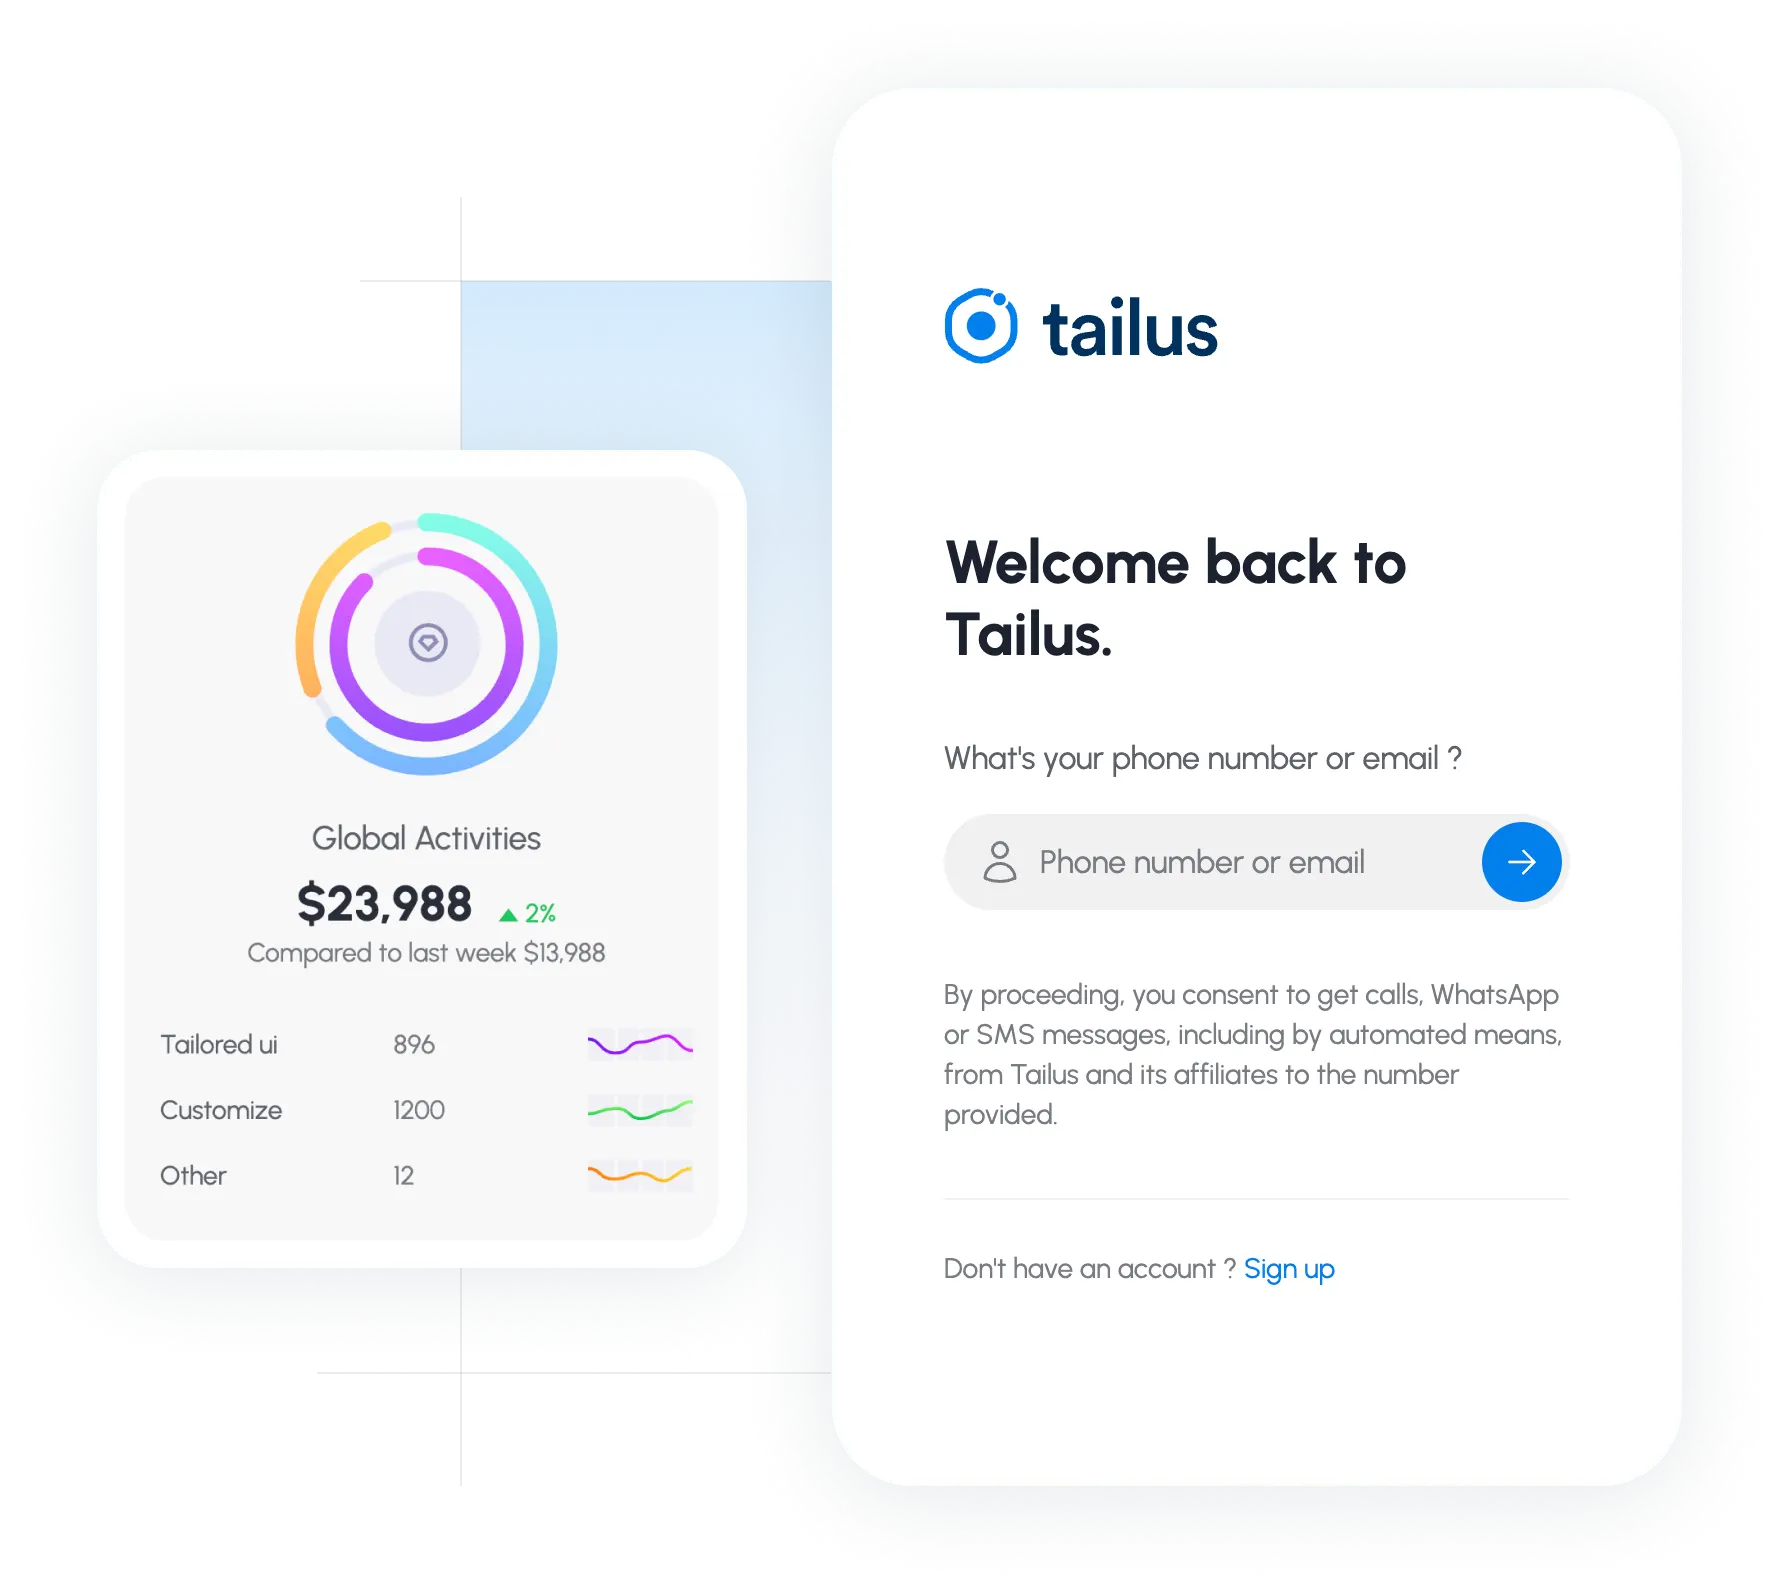 tailus stats and login components